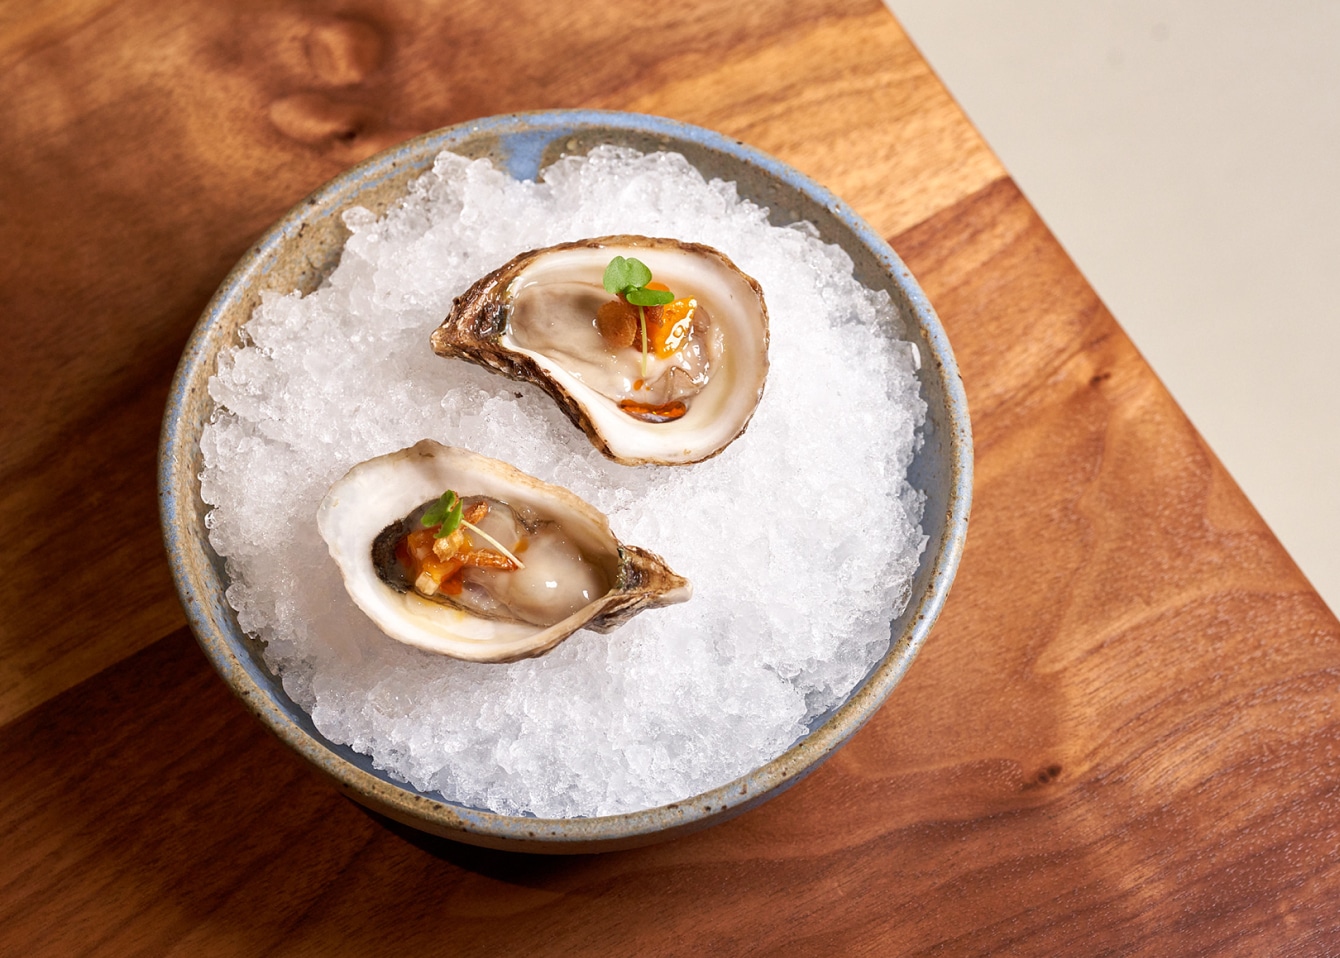 Oysters served on ice in an earthen bowl.